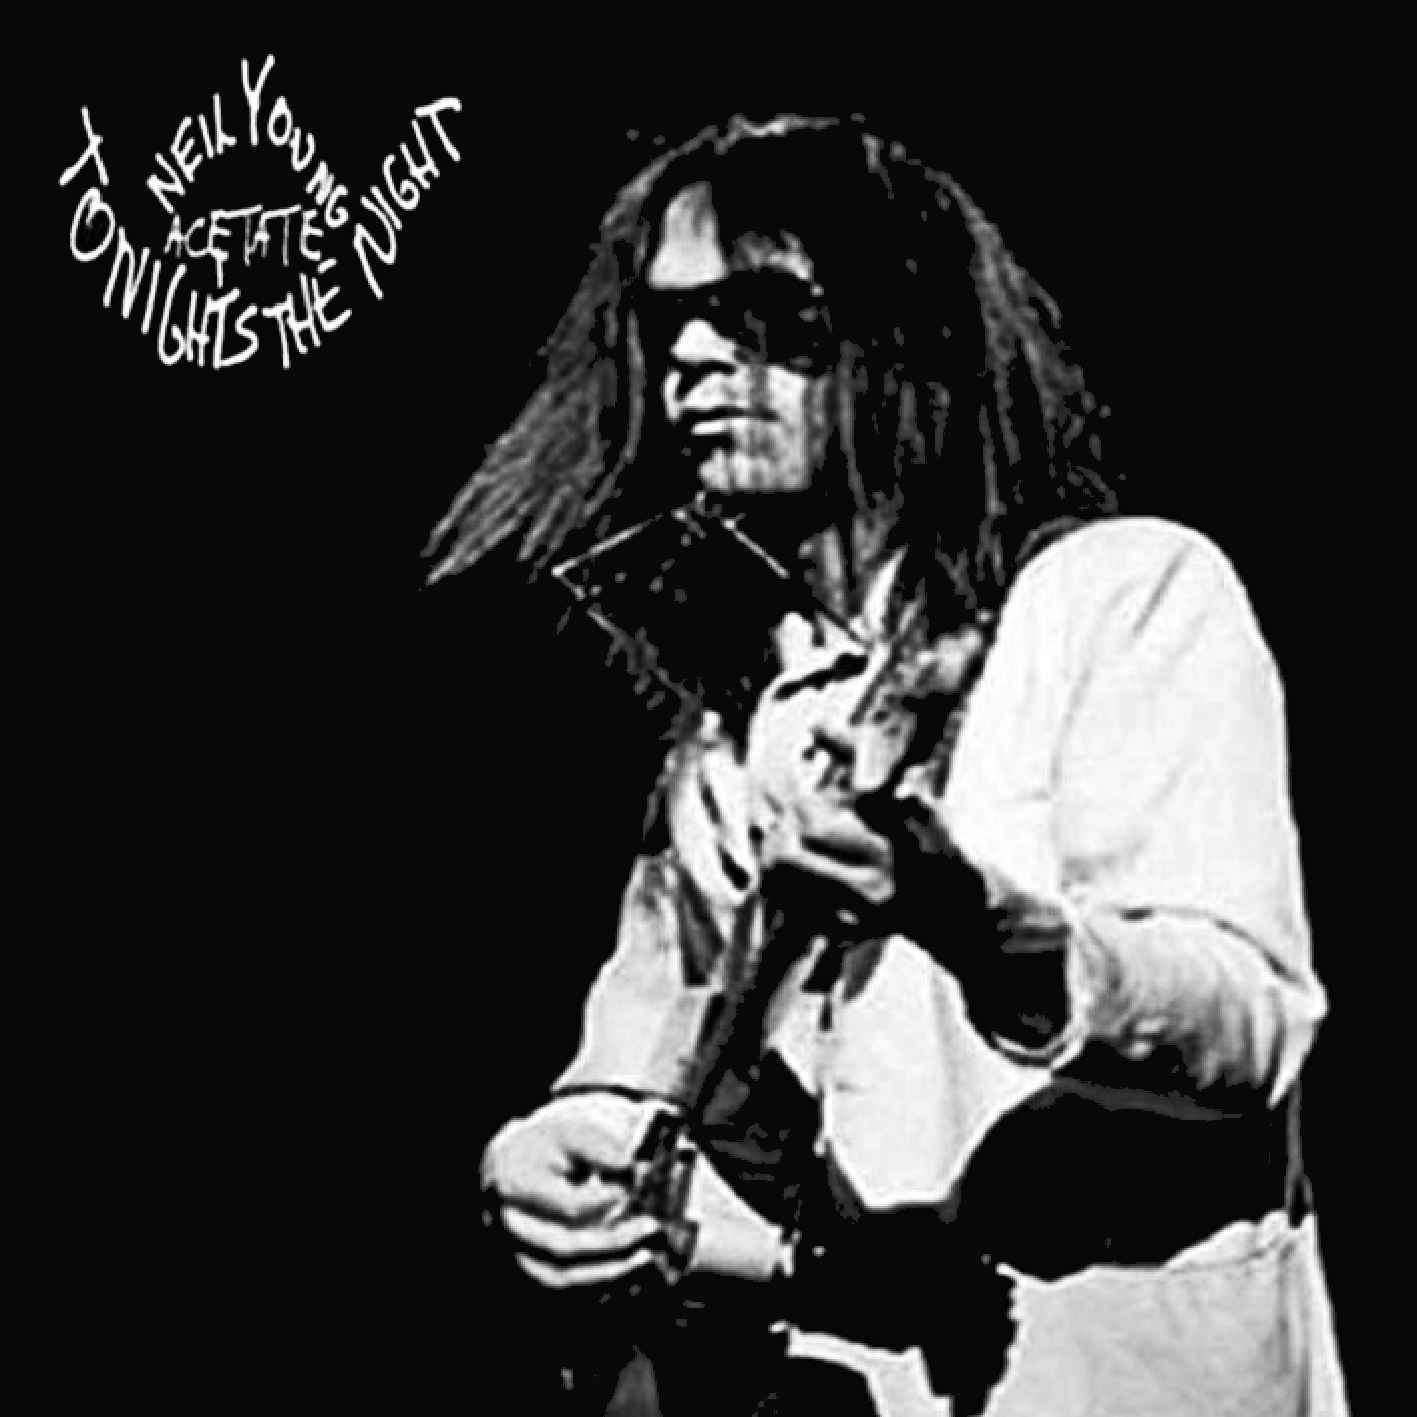 [neil.young.tonights.the.night.acetate.1973-74.front.jpg]